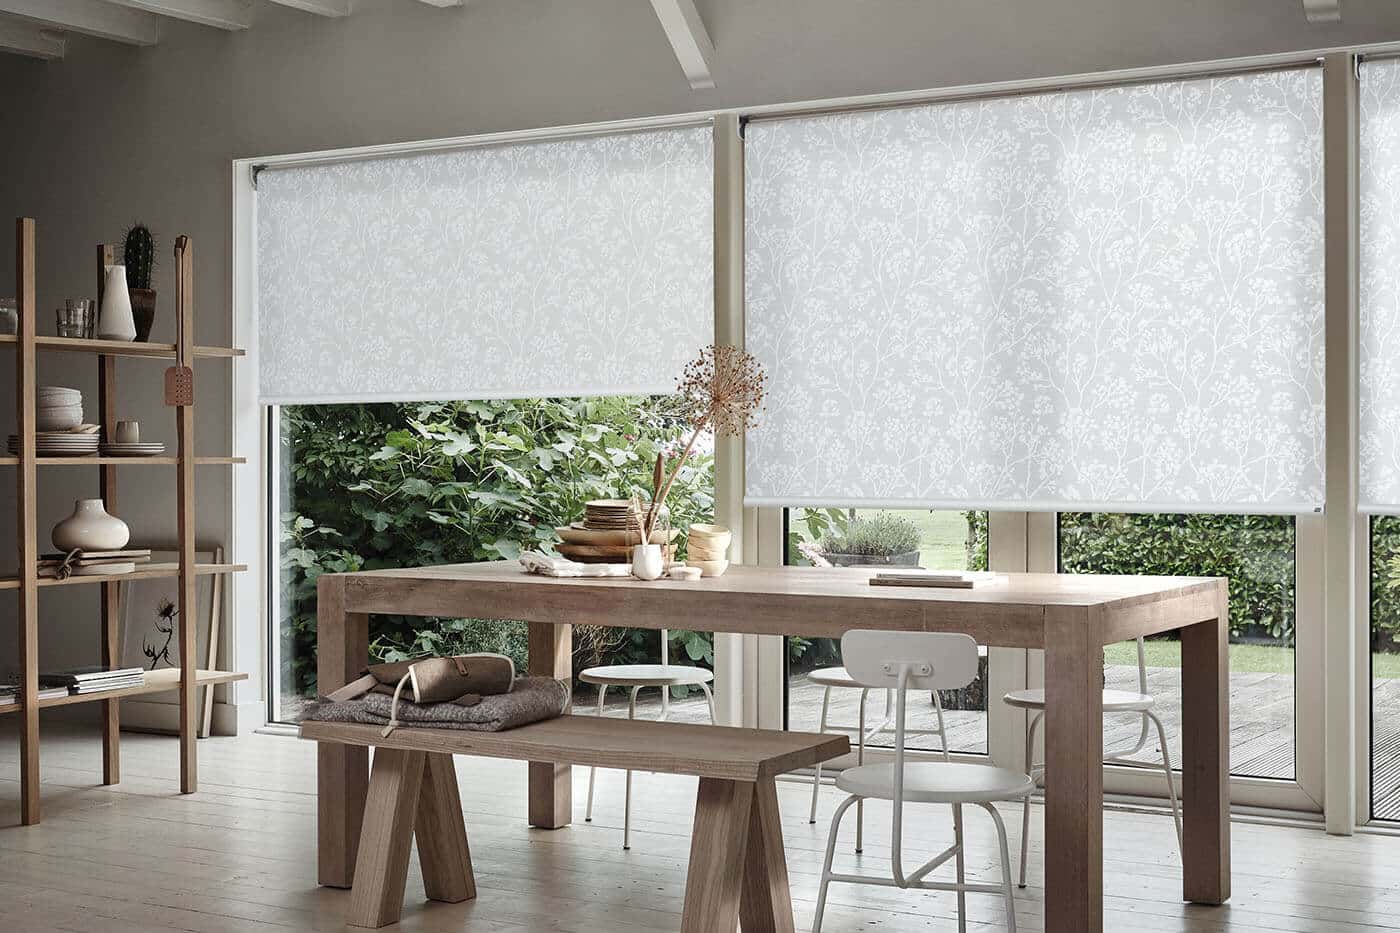 Translucent blinds in earth tone design style kitchen and dinning space. Floral pattern fabric with strain-repelling coating. For sale in our Sydney showroom.